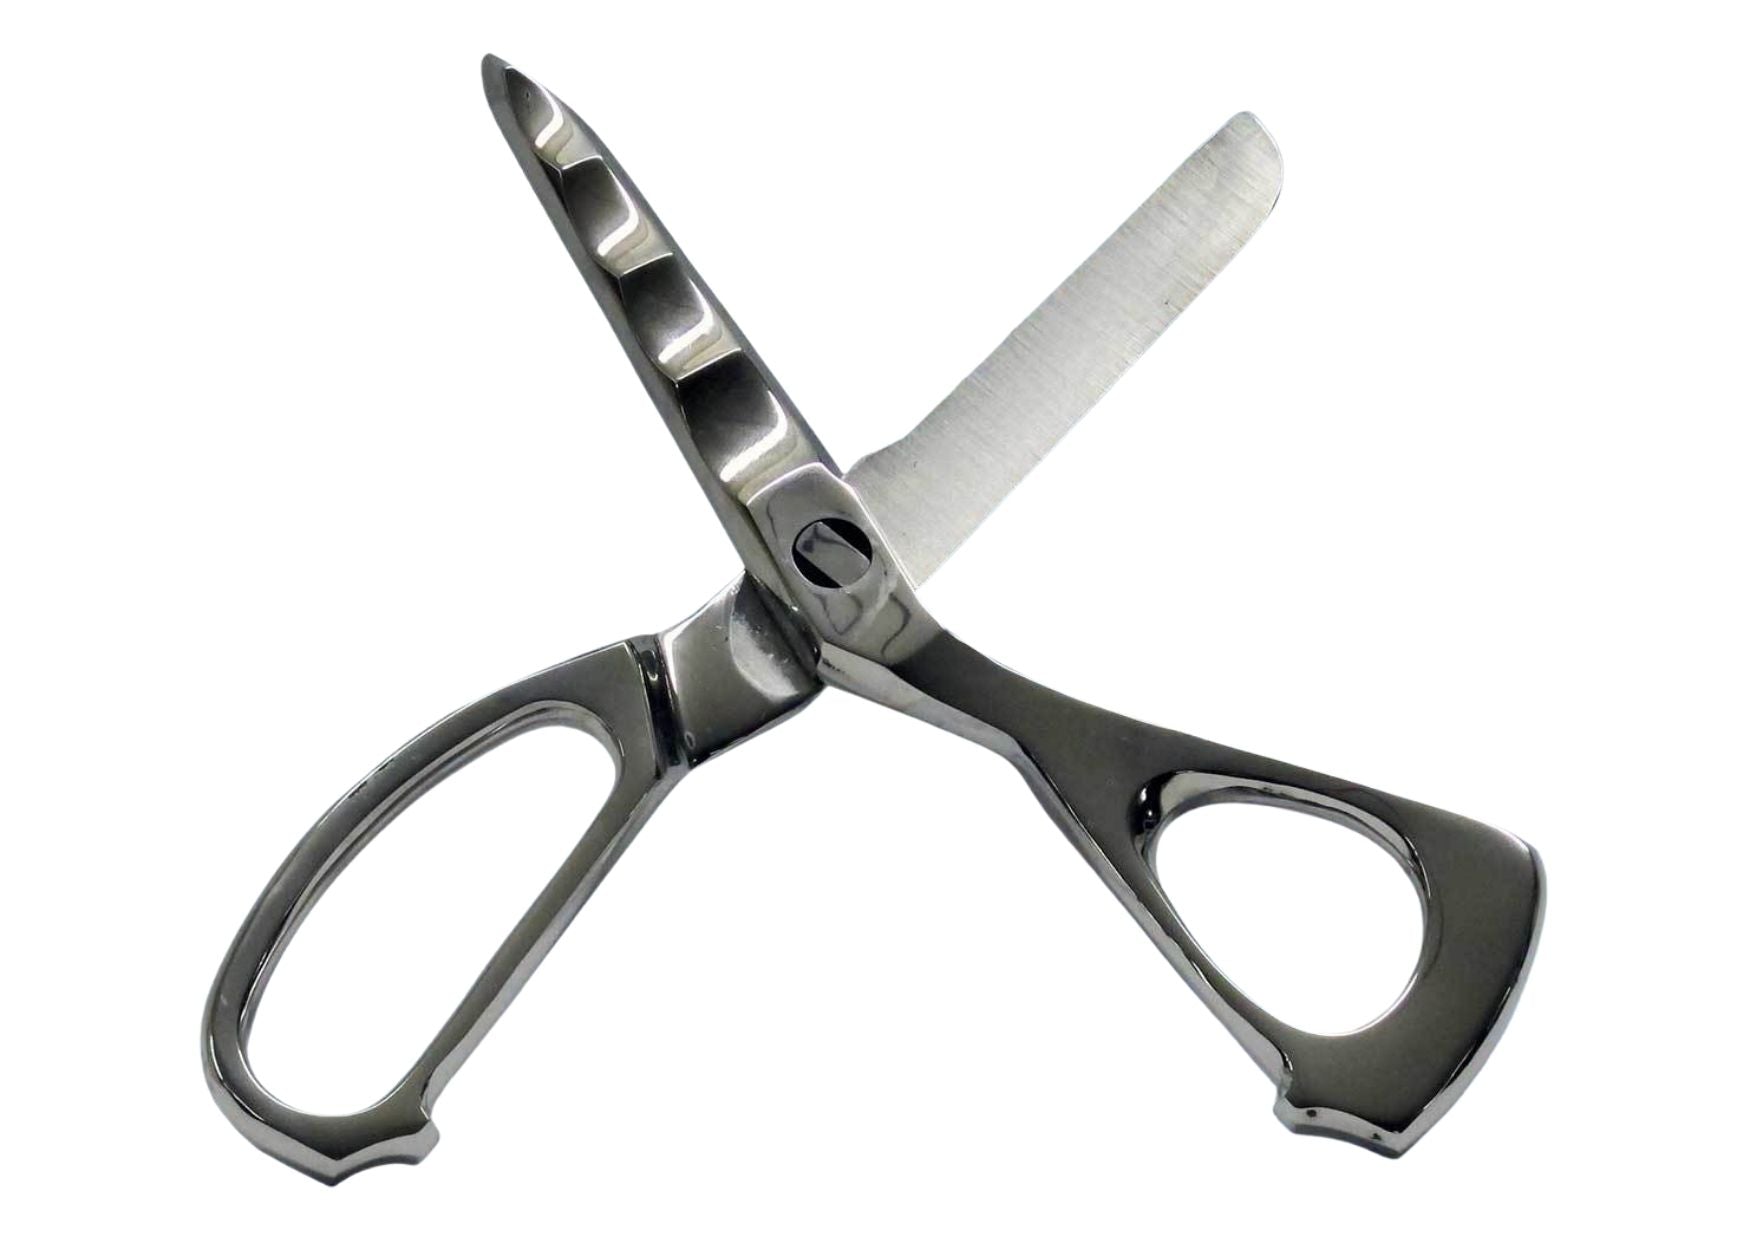 Lavabis multifunction rescue shears with holster stainless steel